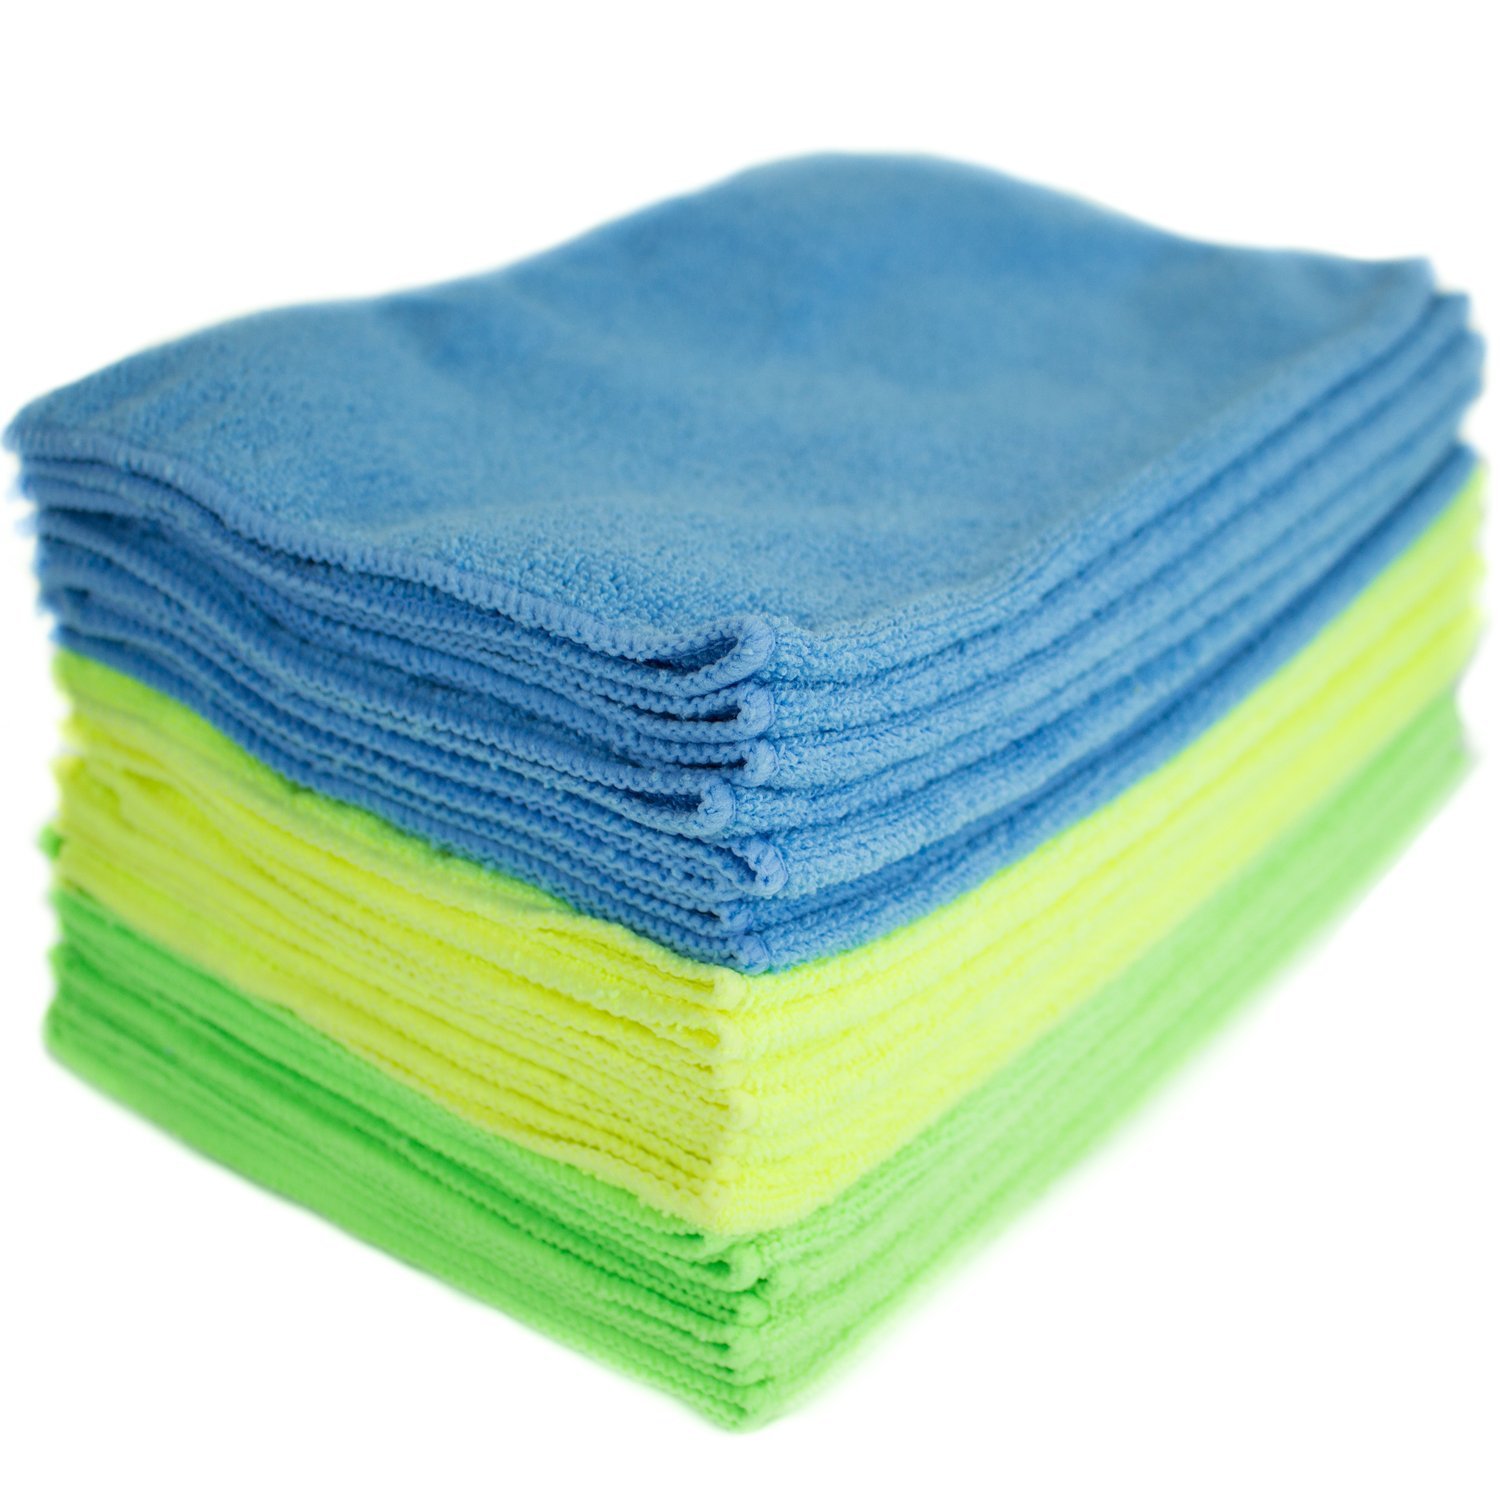 Zwipes Microfiber Cleaning Cloths 24-Pack – Just $6.83!